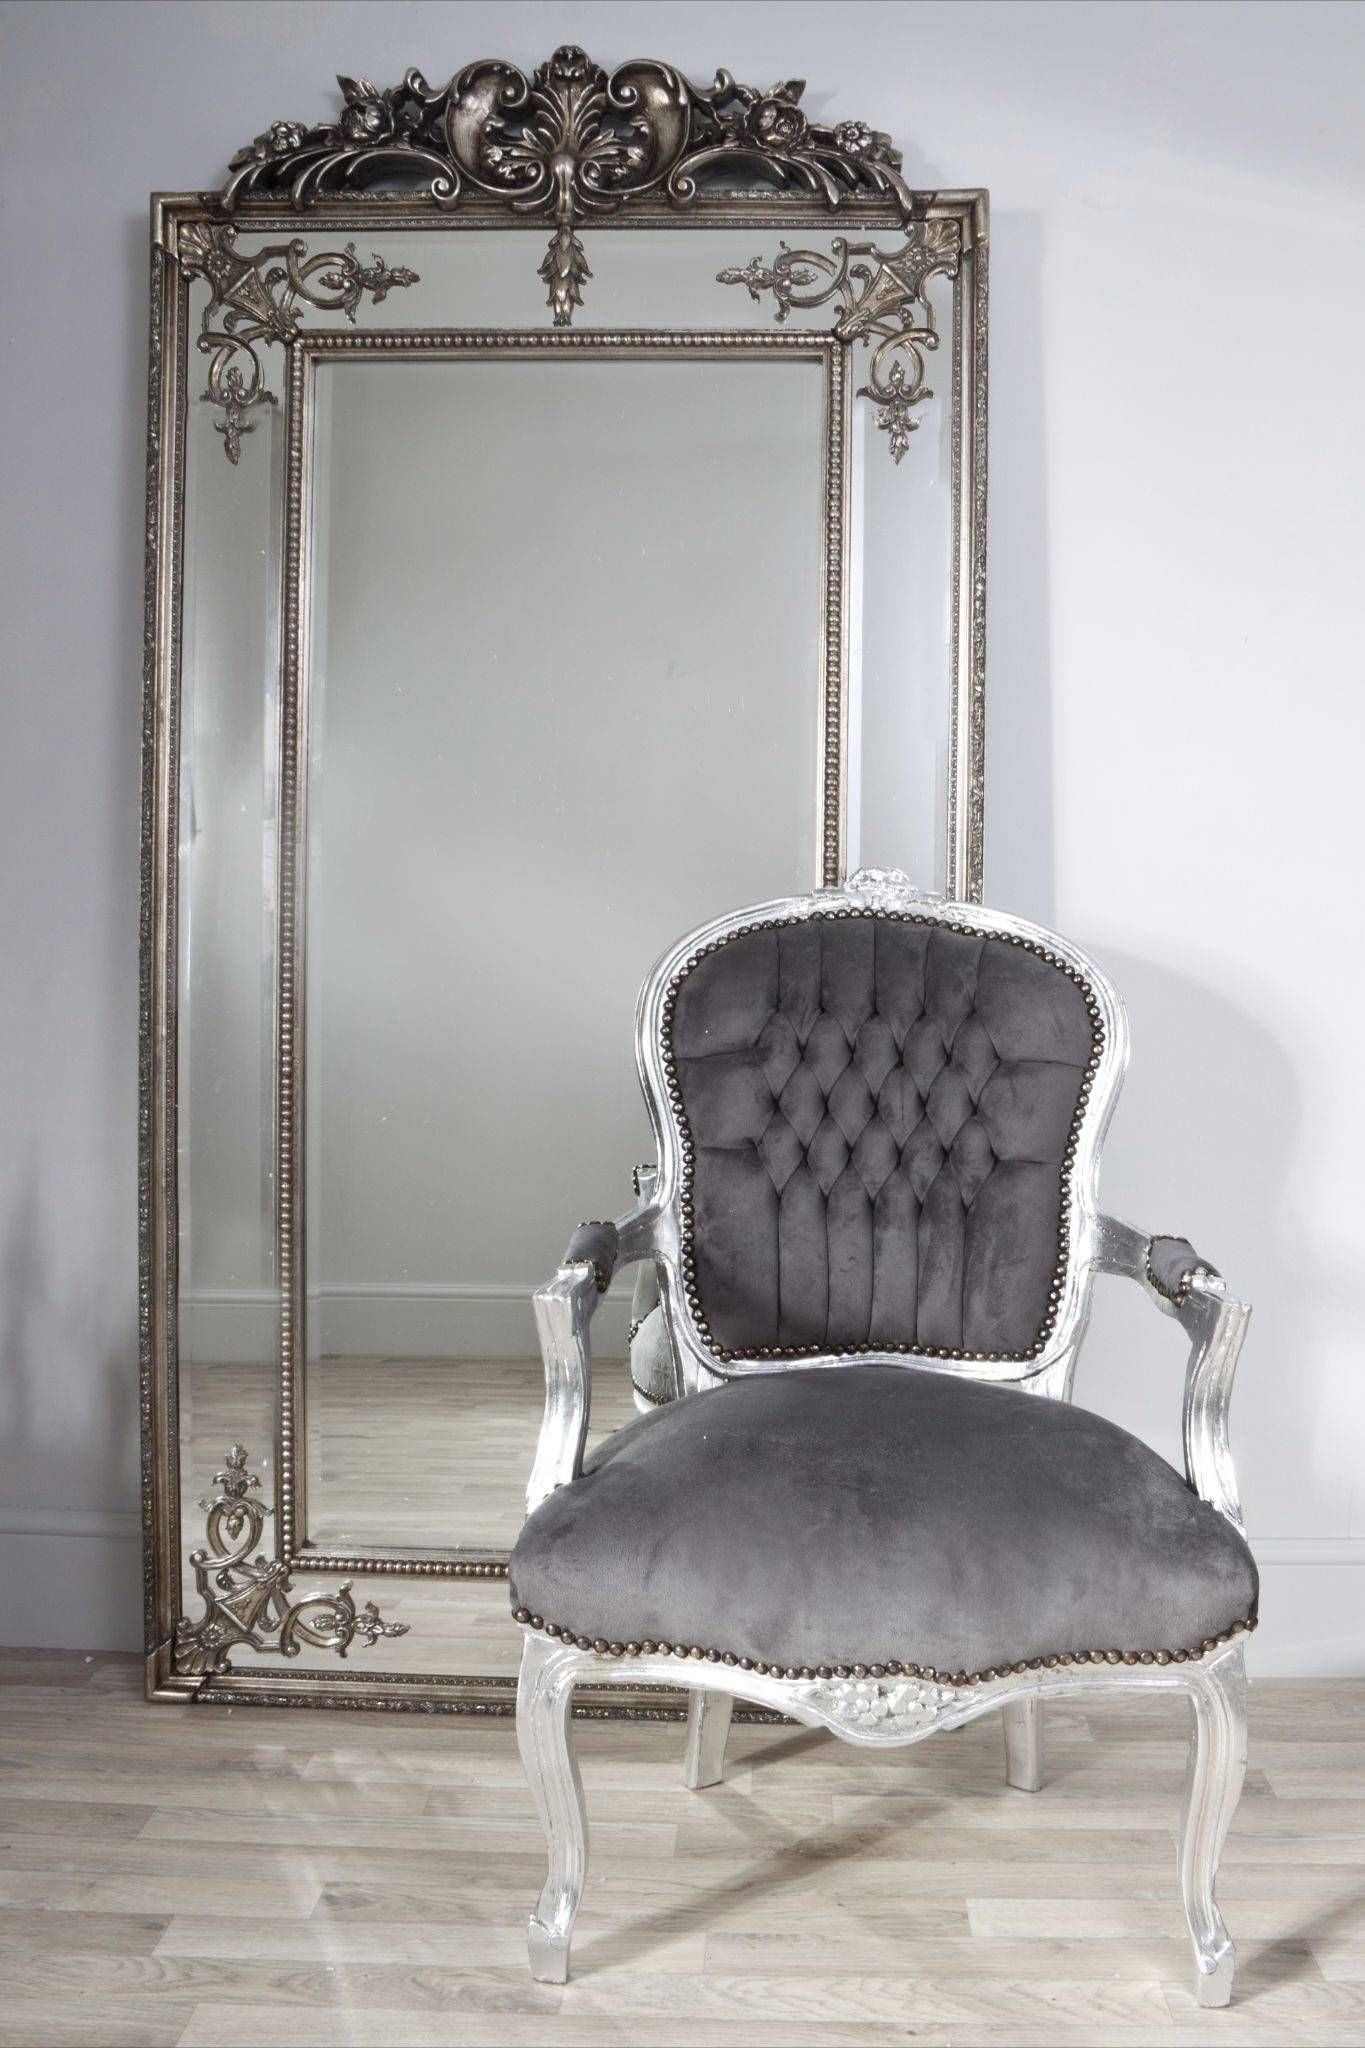 25 Best Collection of Large Ornate Mirrors